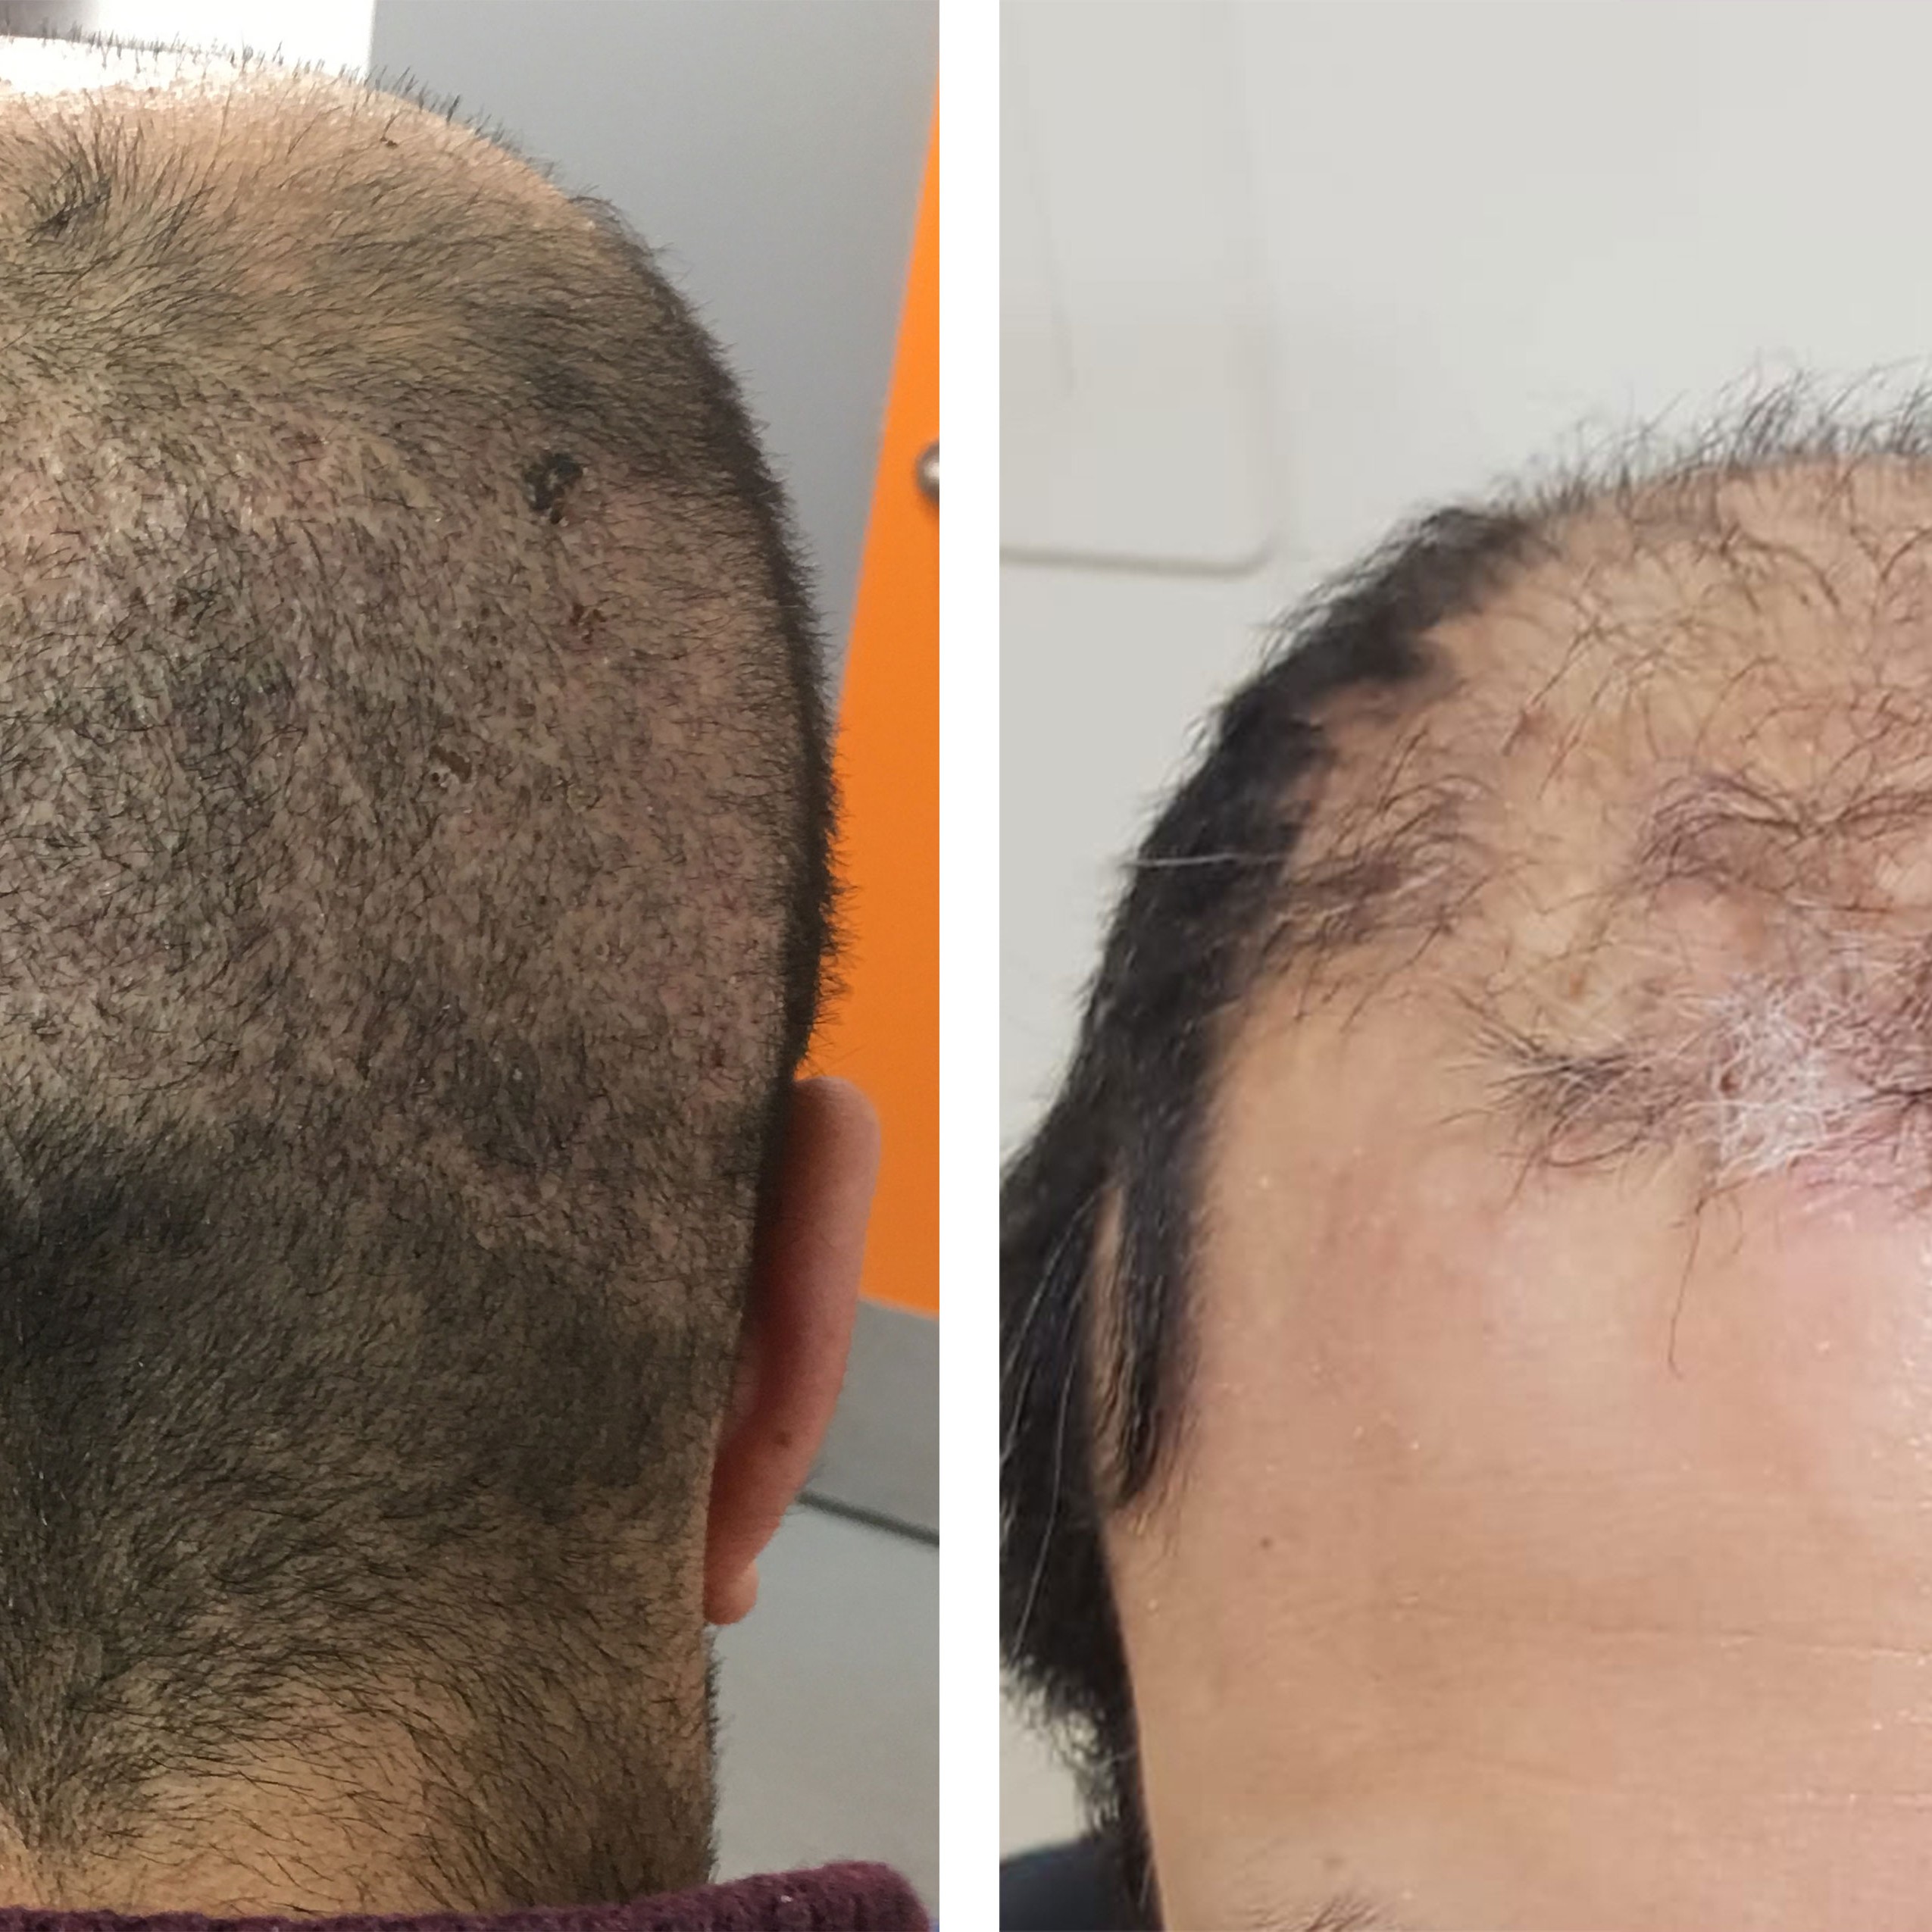 What Happens When Hair Transplants Go Wrong